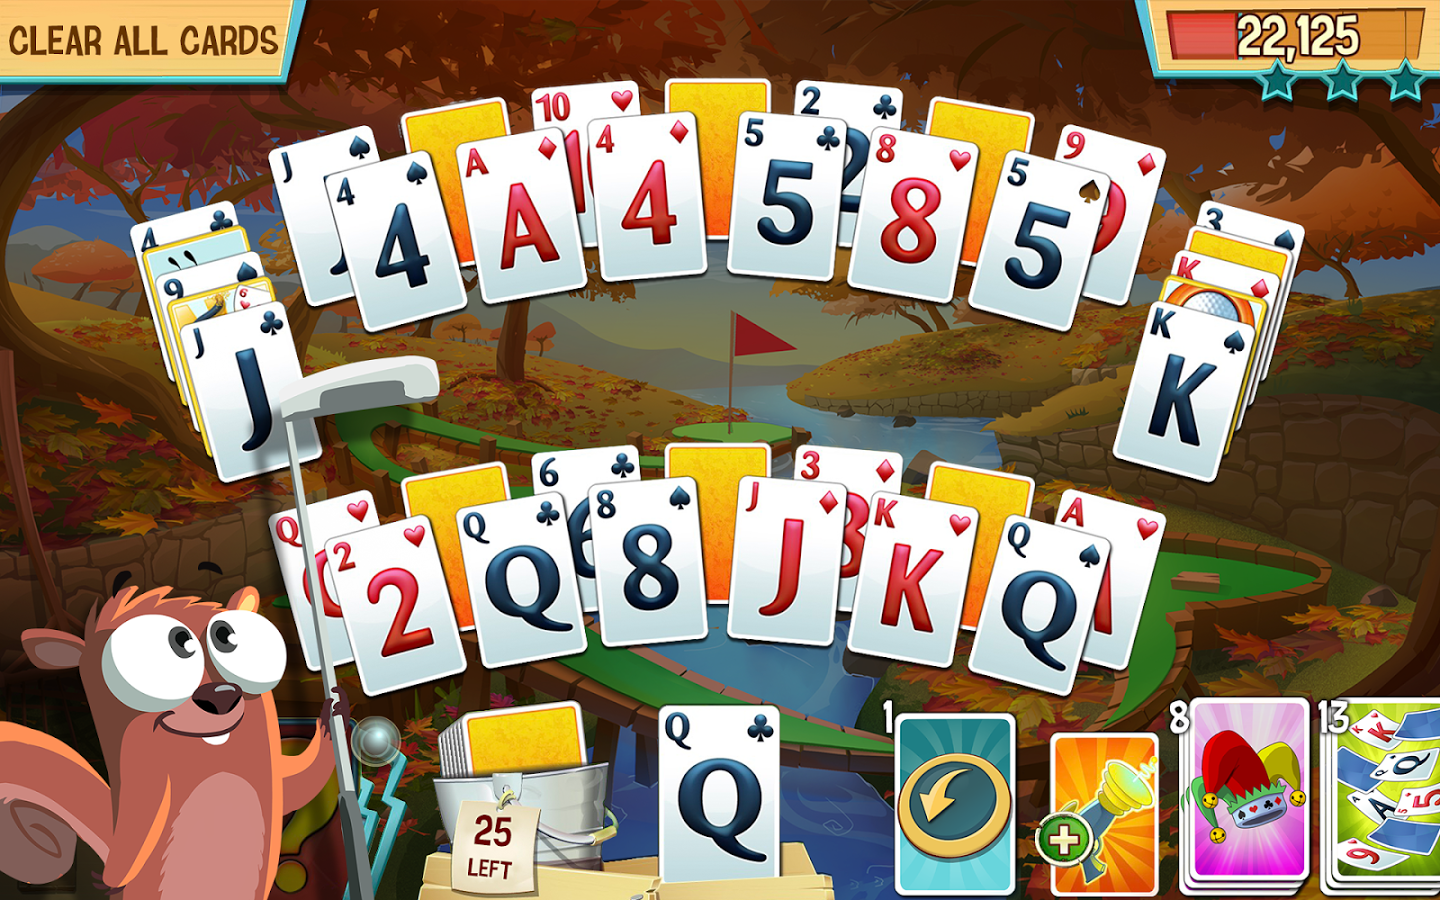 play fairway solitaire online free